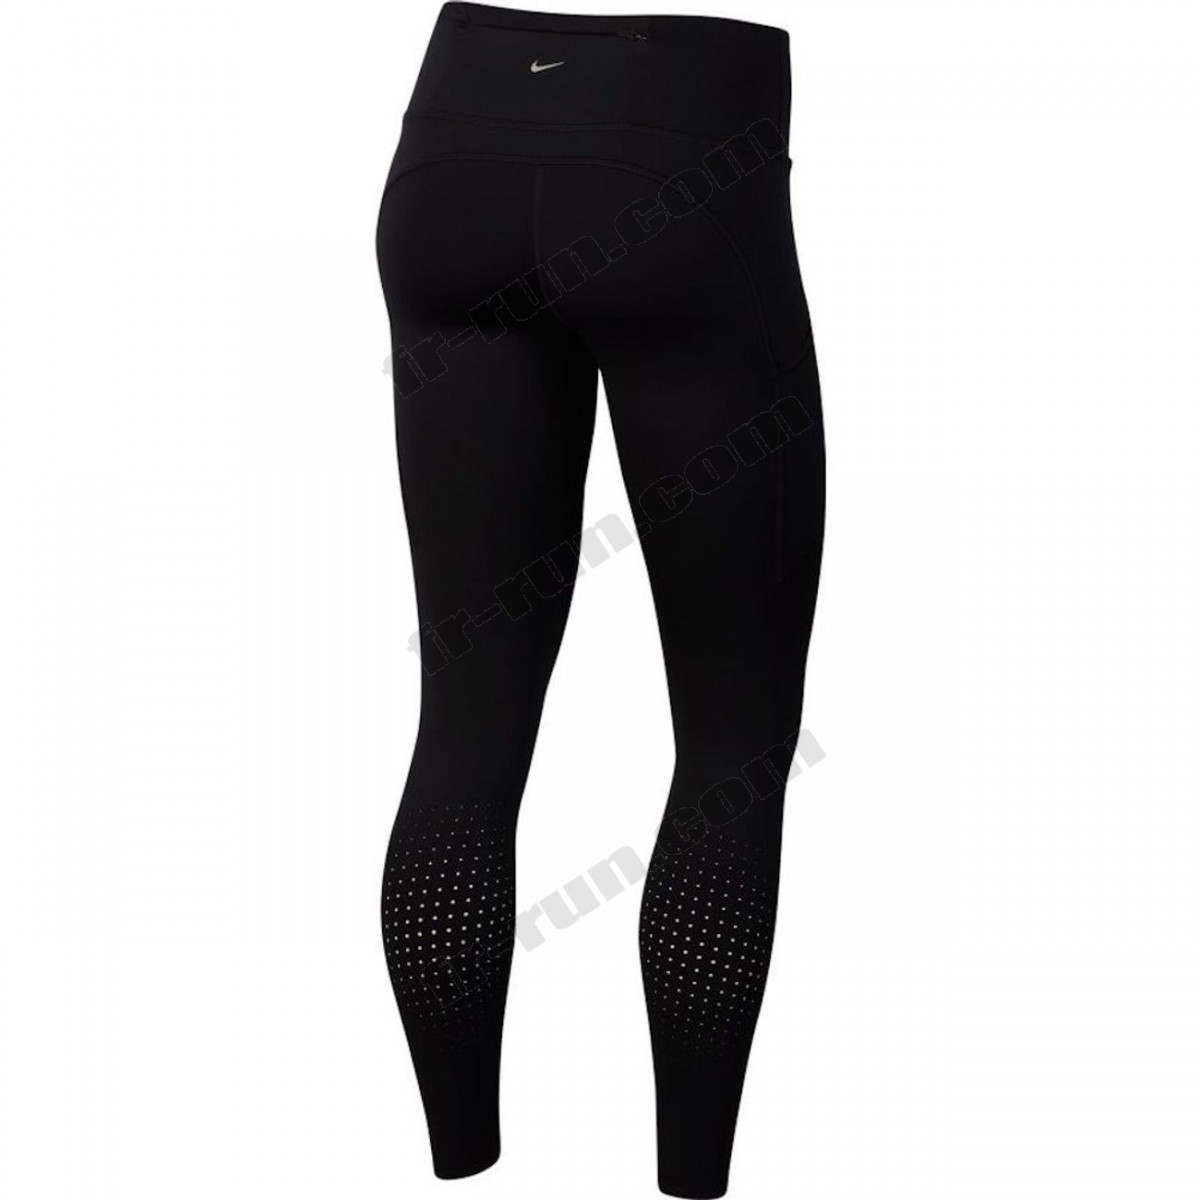 Nike/running femme NIKE Nike Epic Lux Tight W √ Nouveau style √ Soldes - -1